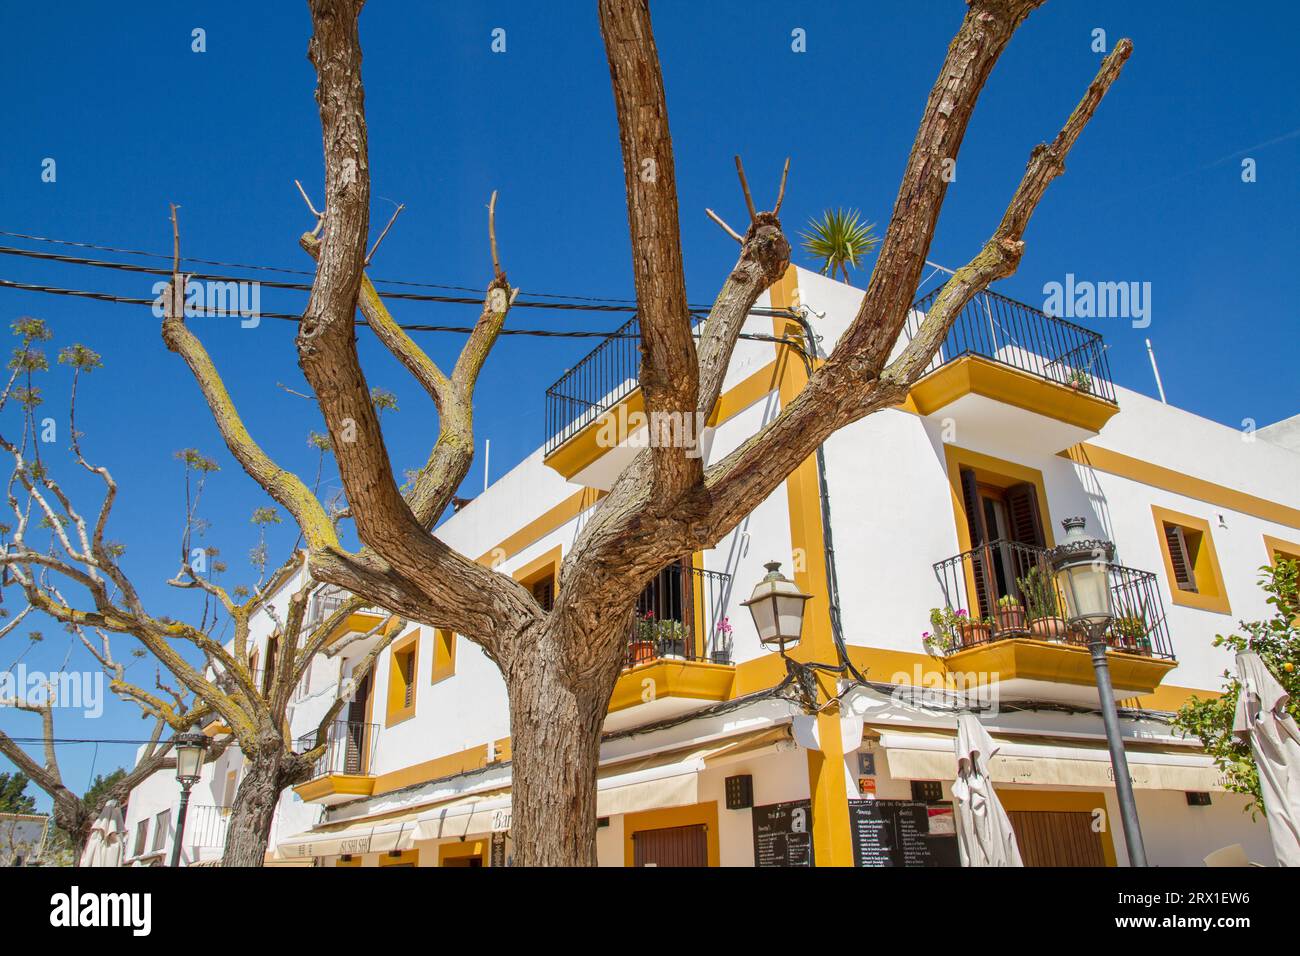 Pitoresque village Santa Gertrudis, famous place for a daytrip at Ibiza island, Balearic islands, Spain, Europe Stock Photo